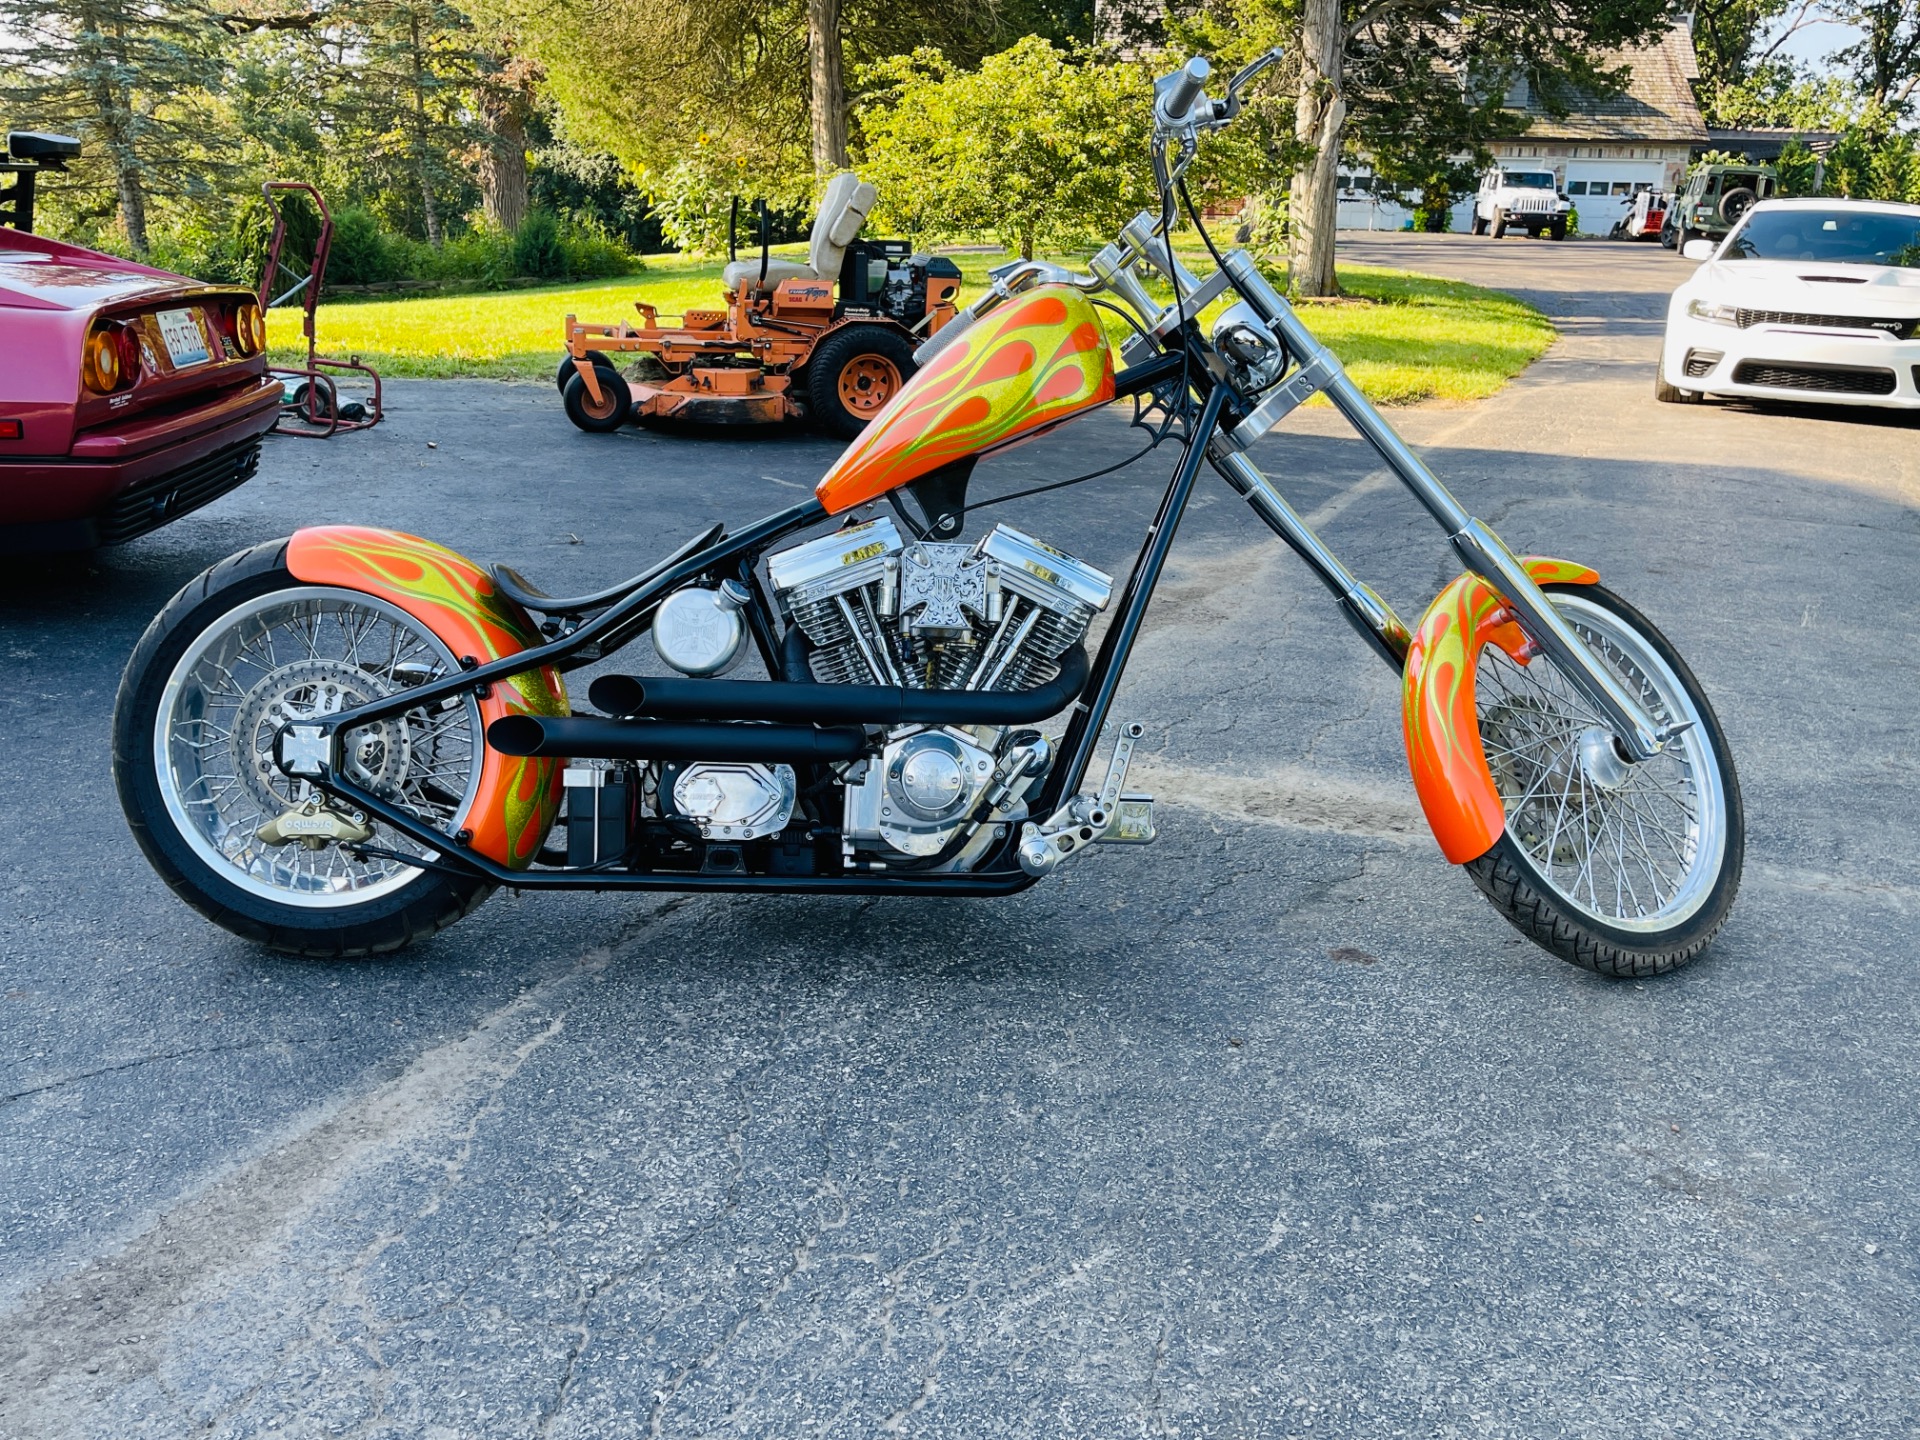 Mini chopper Replica of big chopper From show West Coast Choppers for sale  had in storage for many years Brand new : r/choppers